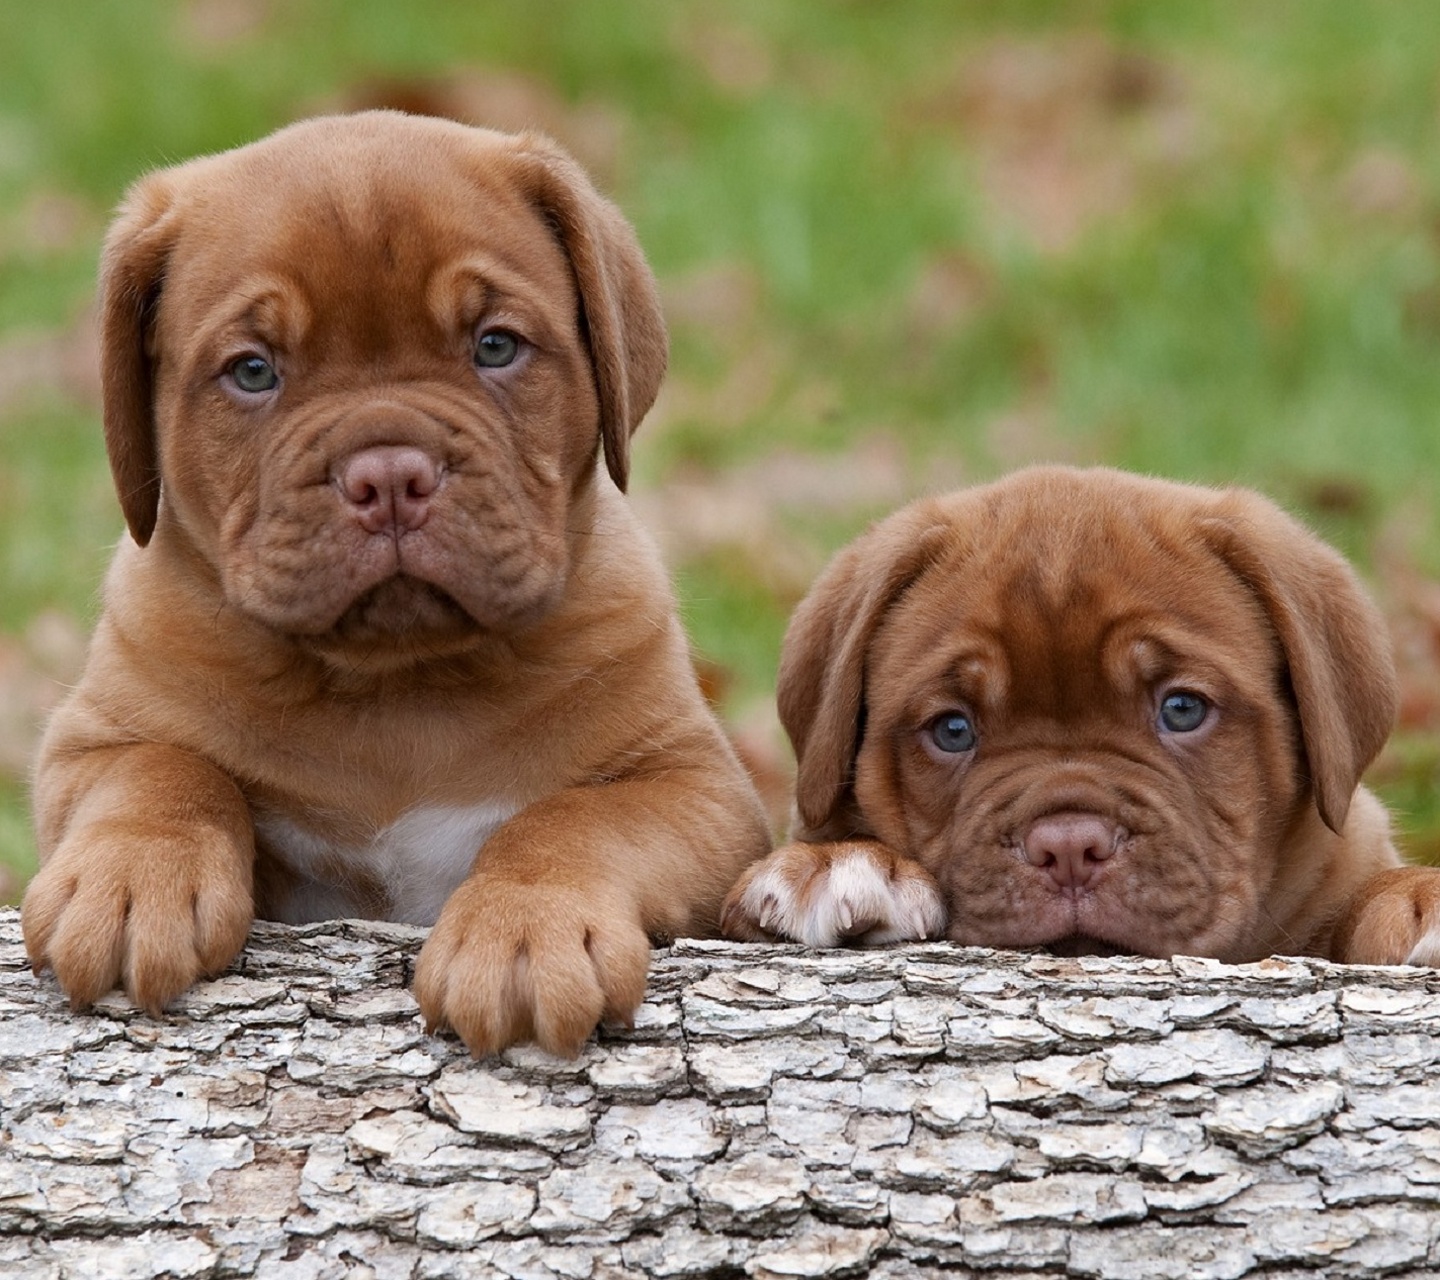 Cute Puppies Wallpaper Background For Mobiles